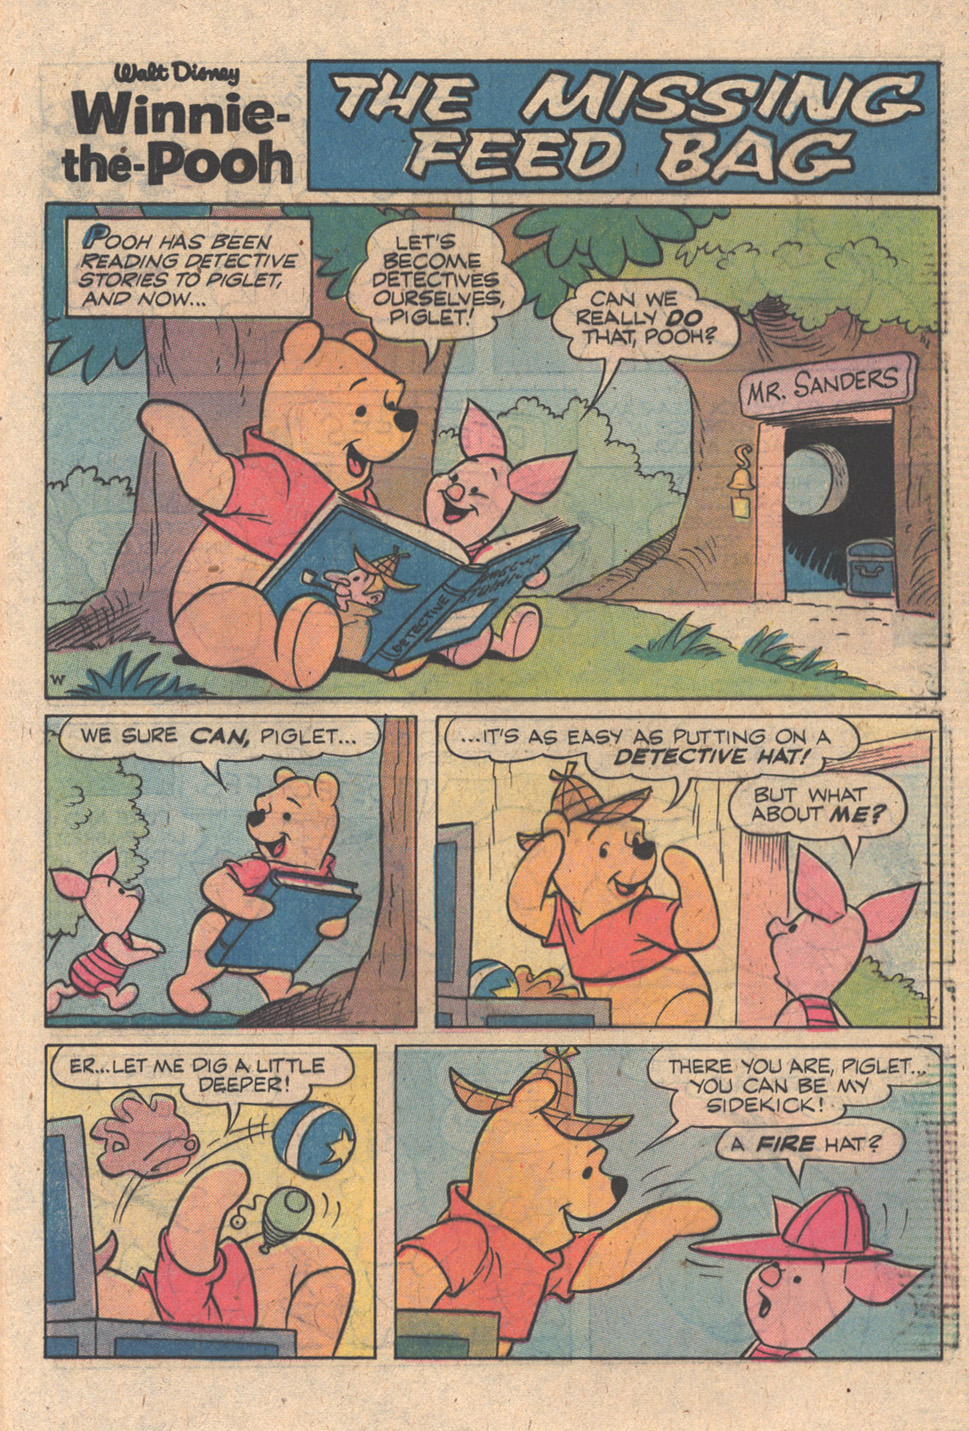 Read online Winnie-the-Pooh comic -  Issue #17 - 25